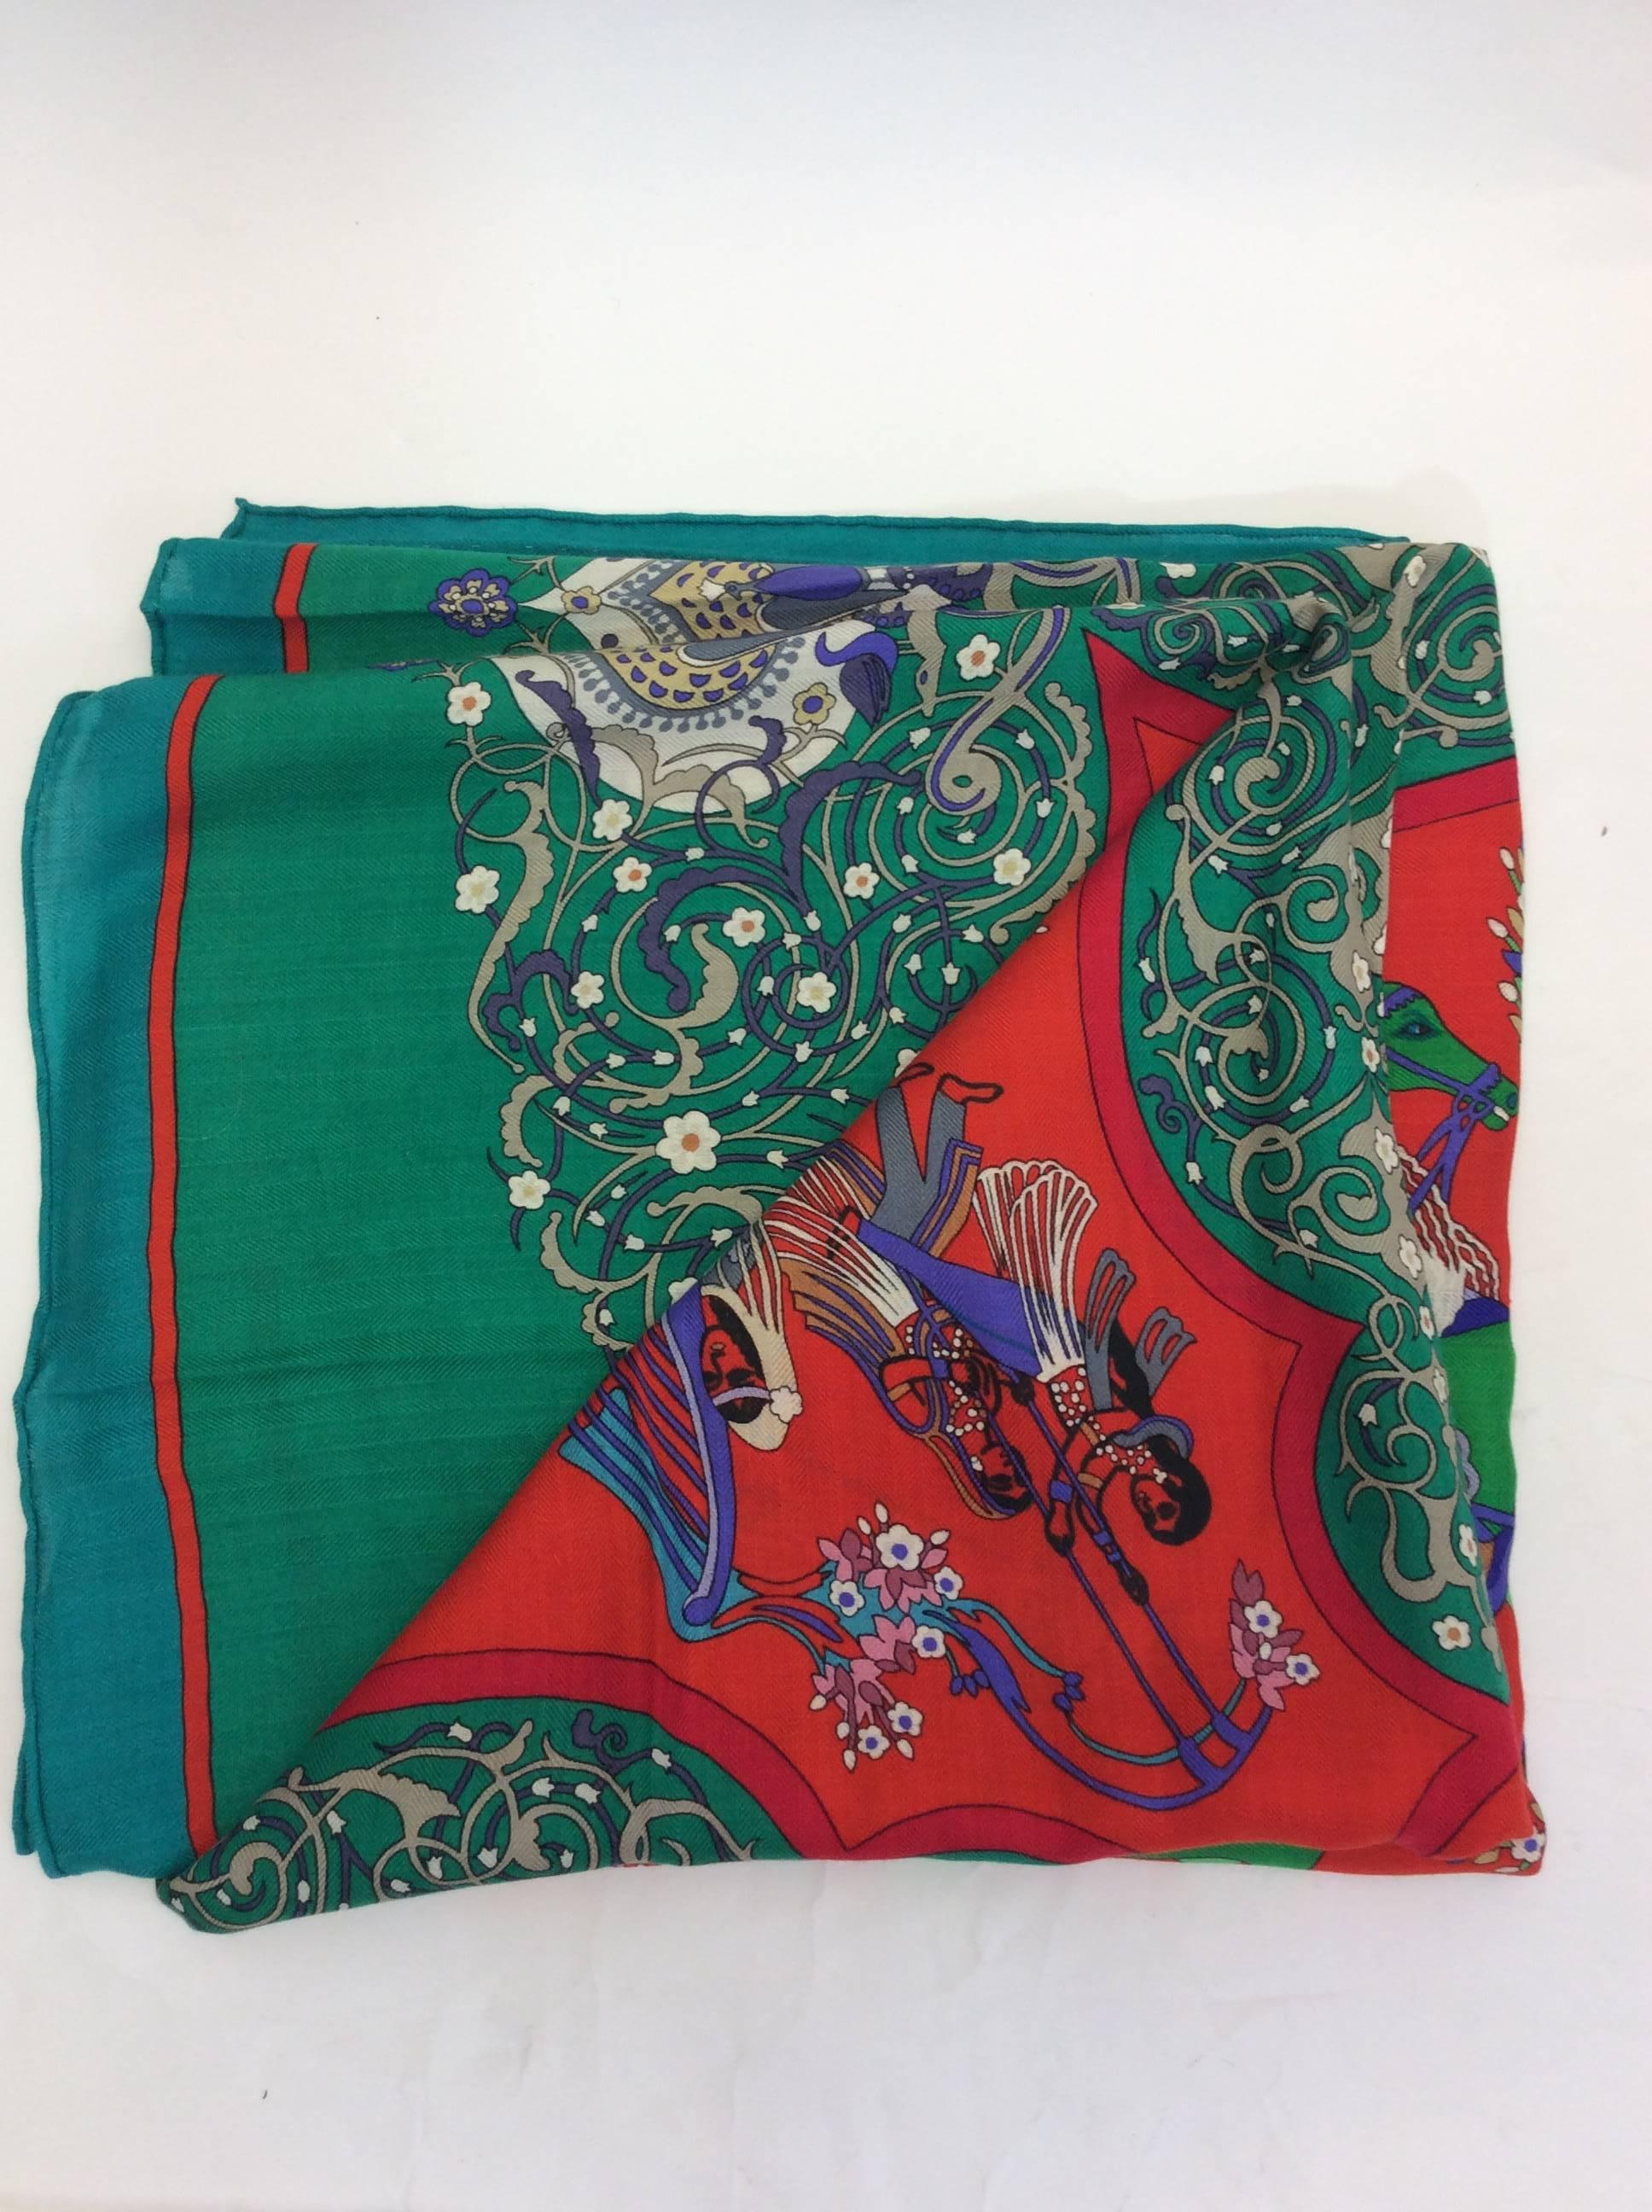 Red And Bright Green Printed Scarf
53 x 53 inches
Bright floral and equestrian design
65% Cashmere, 35% Silk